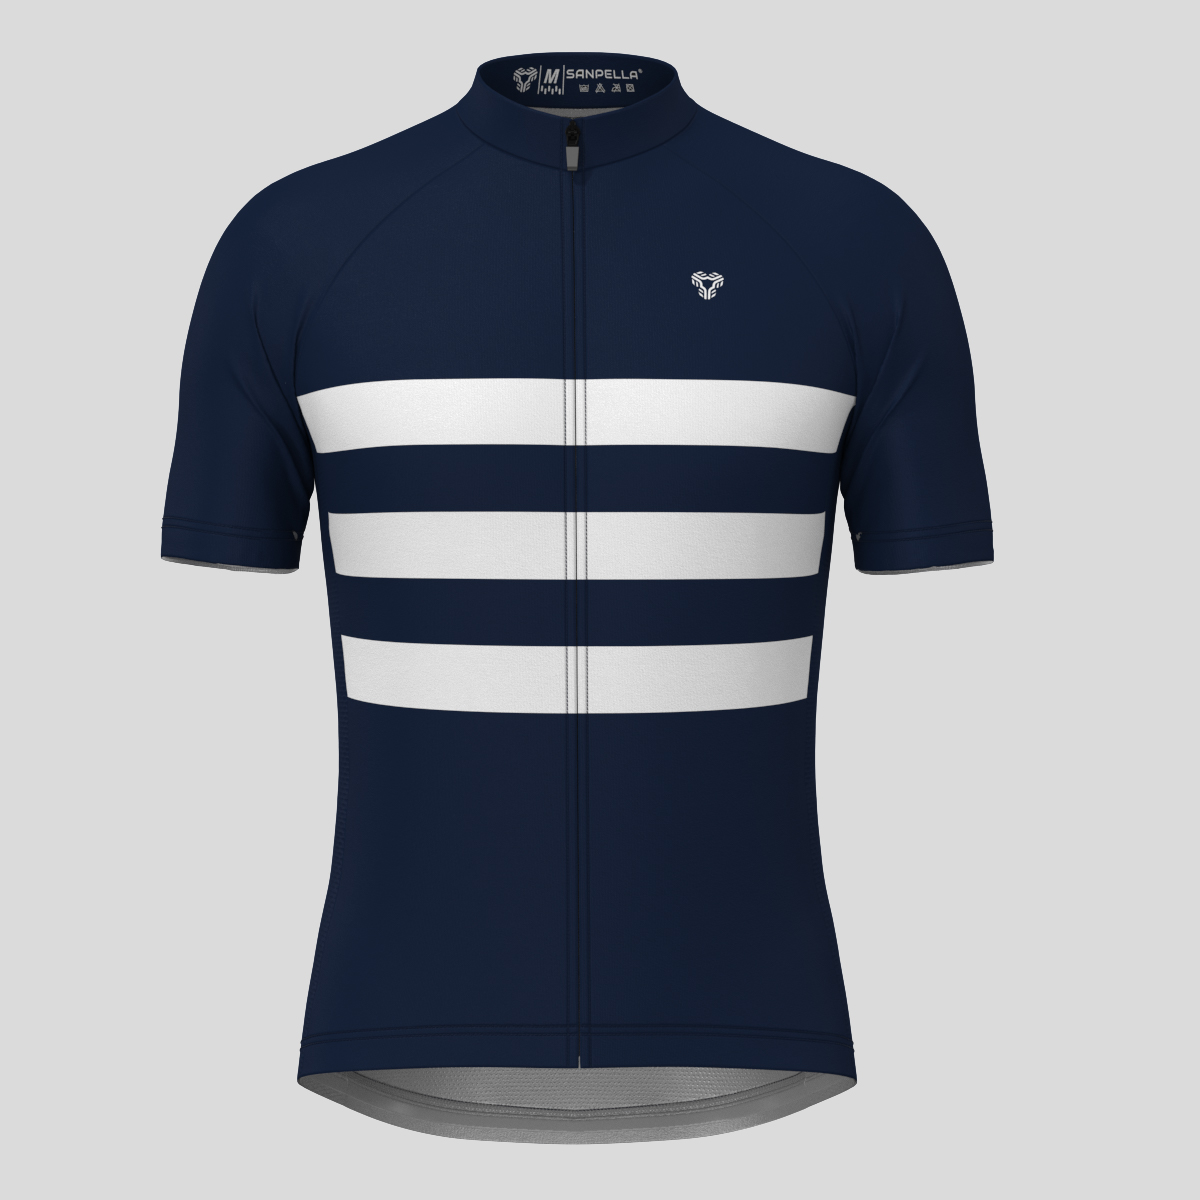 Men's Classic Stripes Cycling Jersey - Navy/White